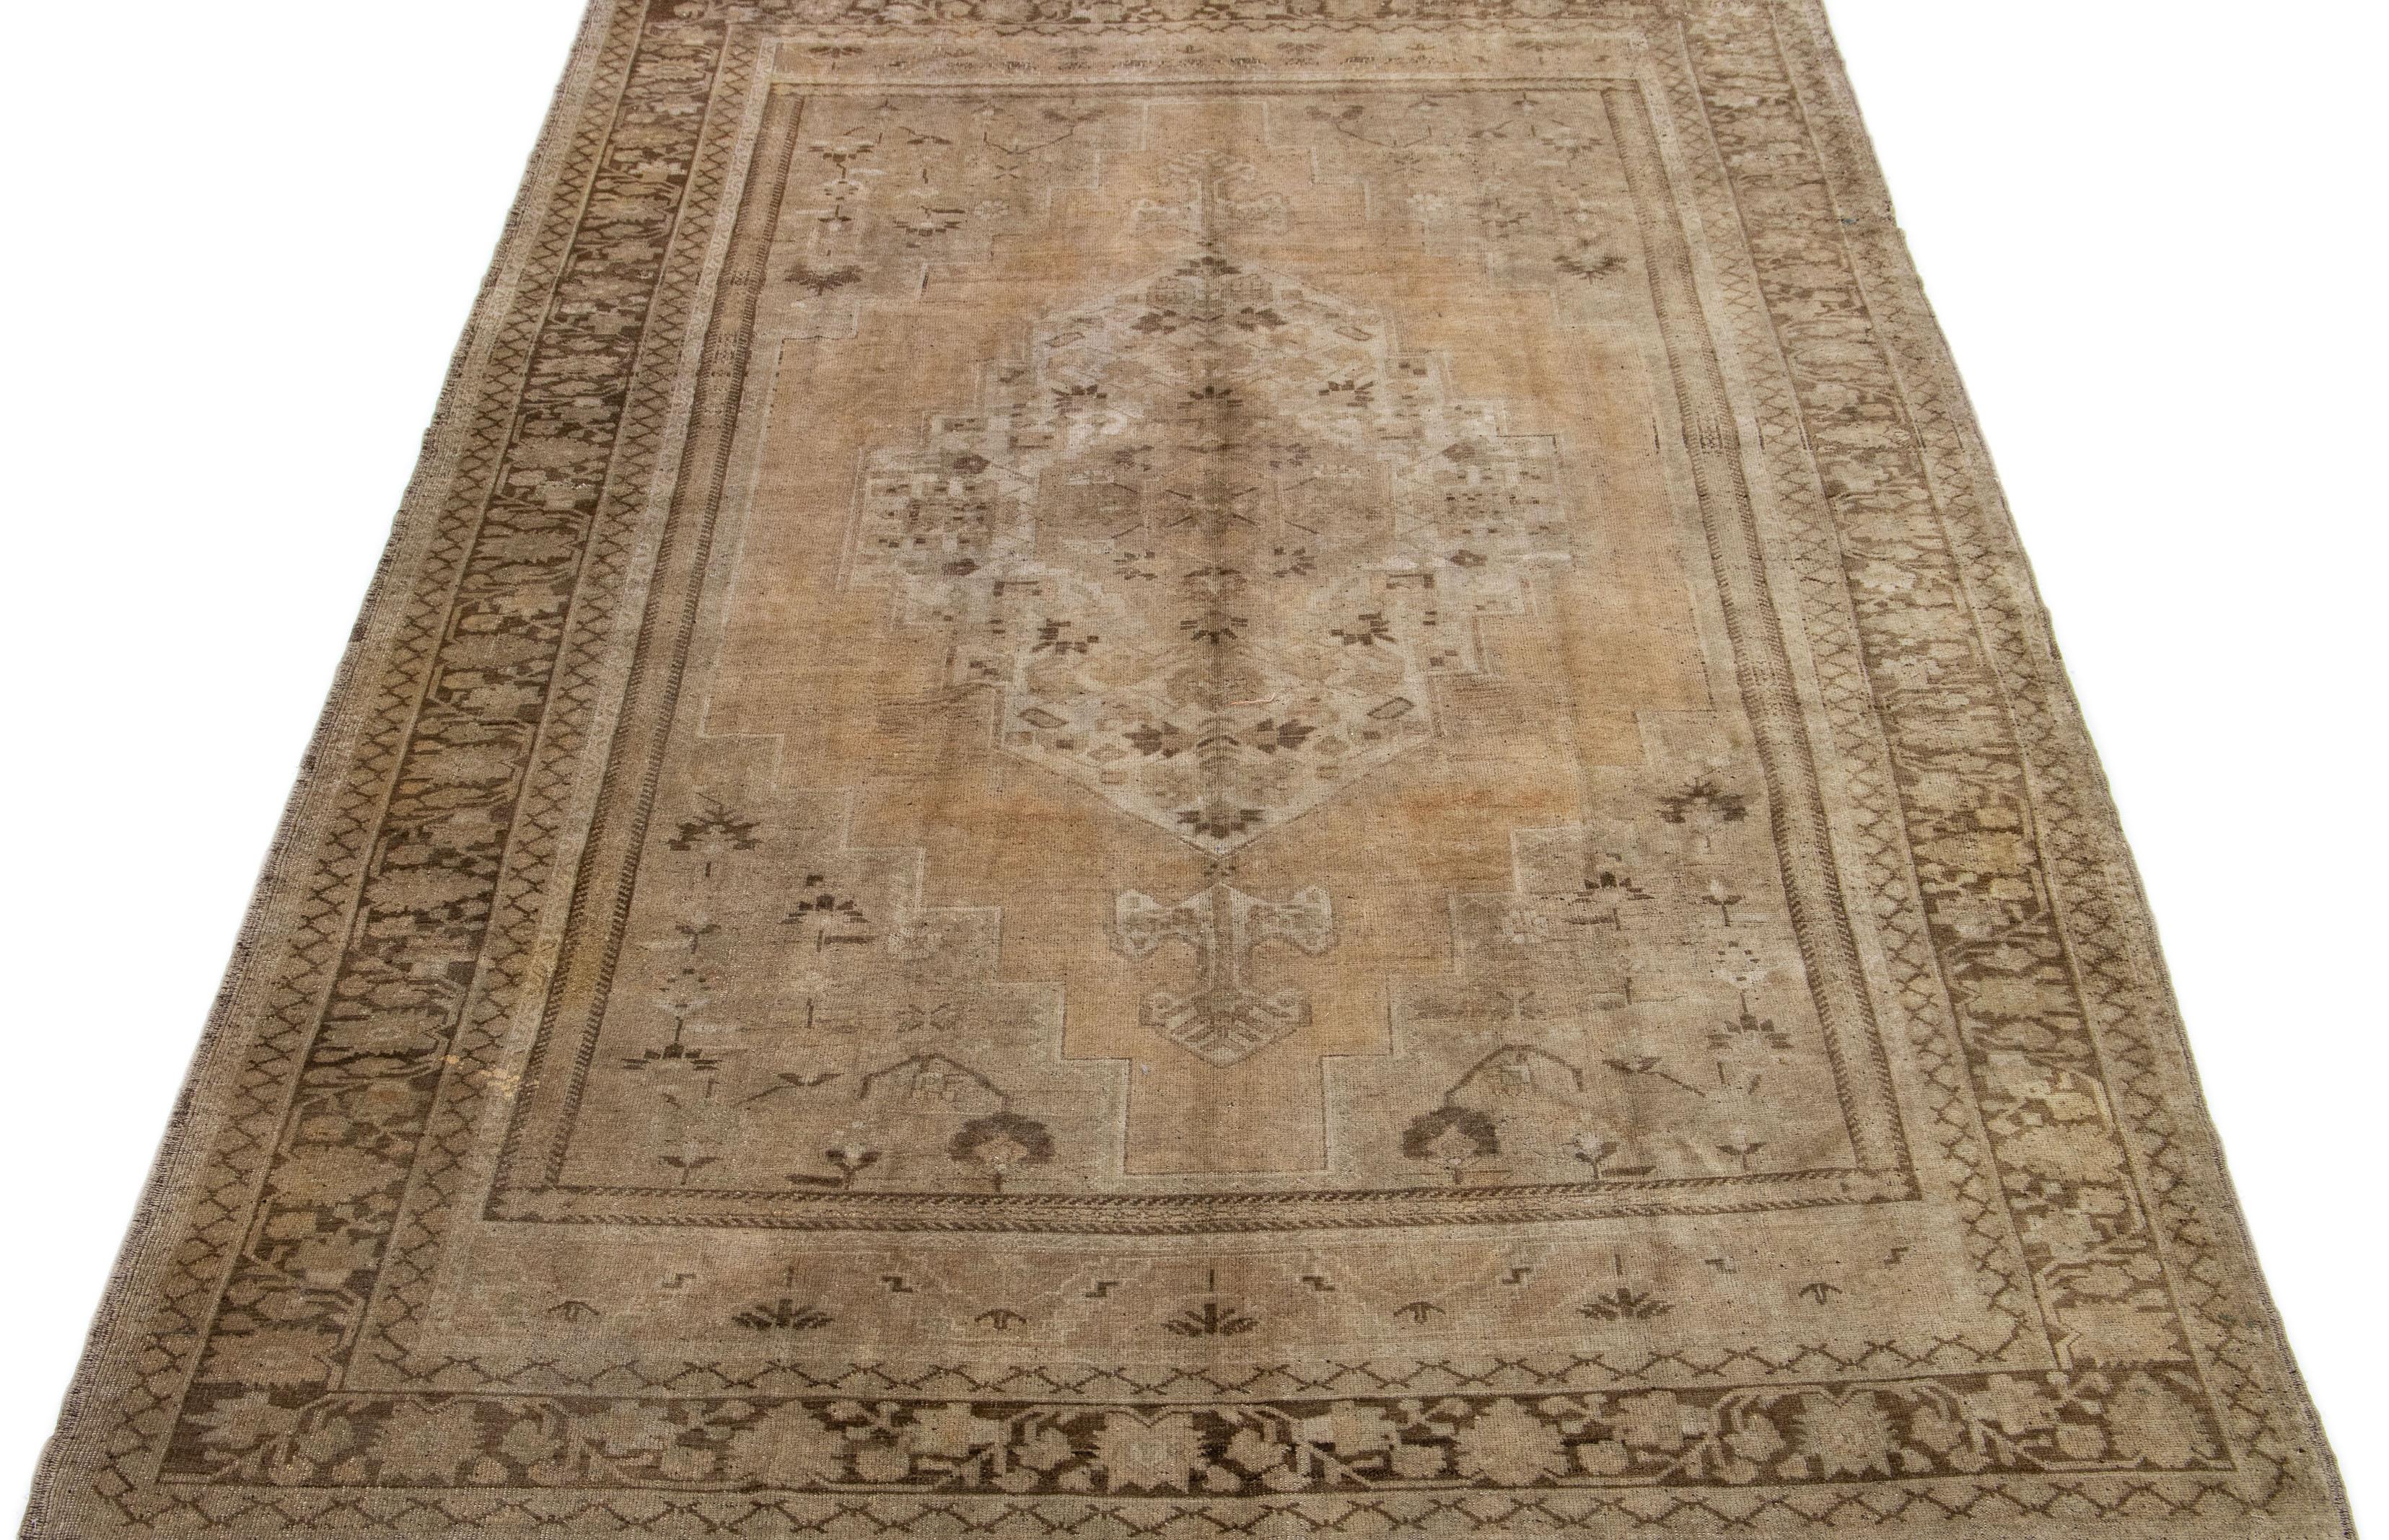 This antique Turkestan Khotan rug features a charming tan background illuminated by elegant peach and brown accents arranged in an intricate central medallion design.

This rug measures 7'6